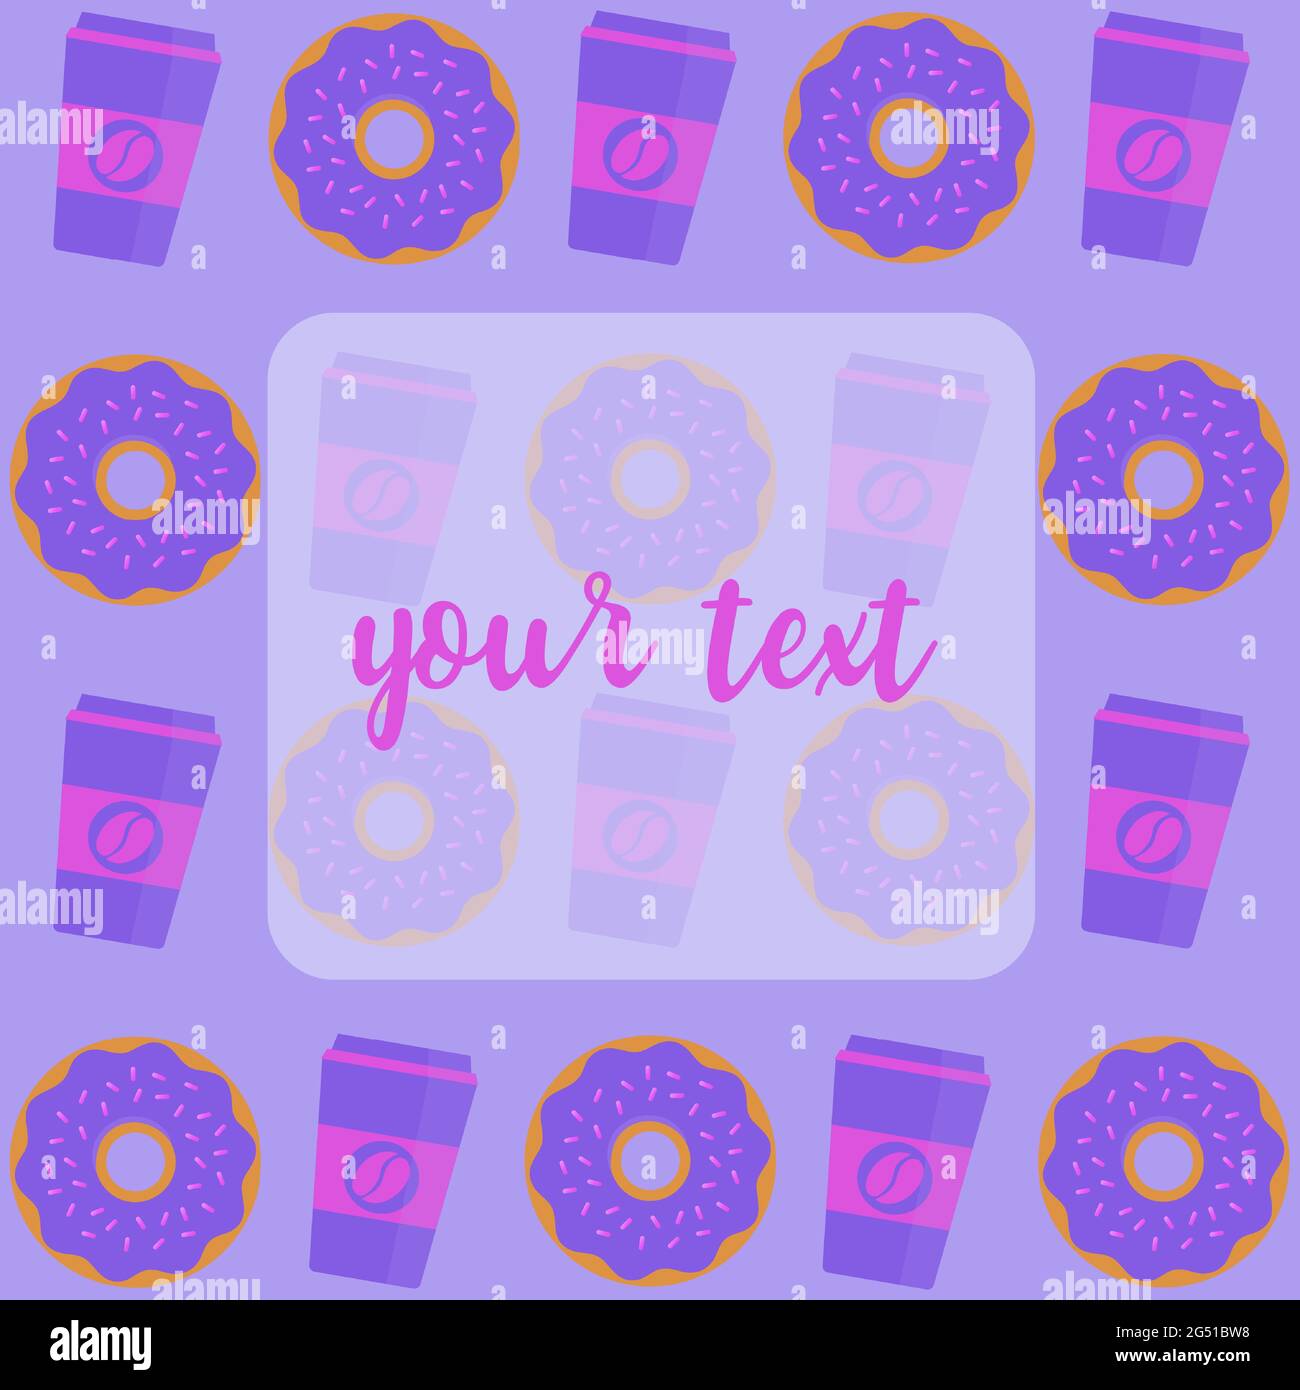 Coffee break time with donuts. Coffee cup and donut top view vector illustration on purple background. Stock Vector